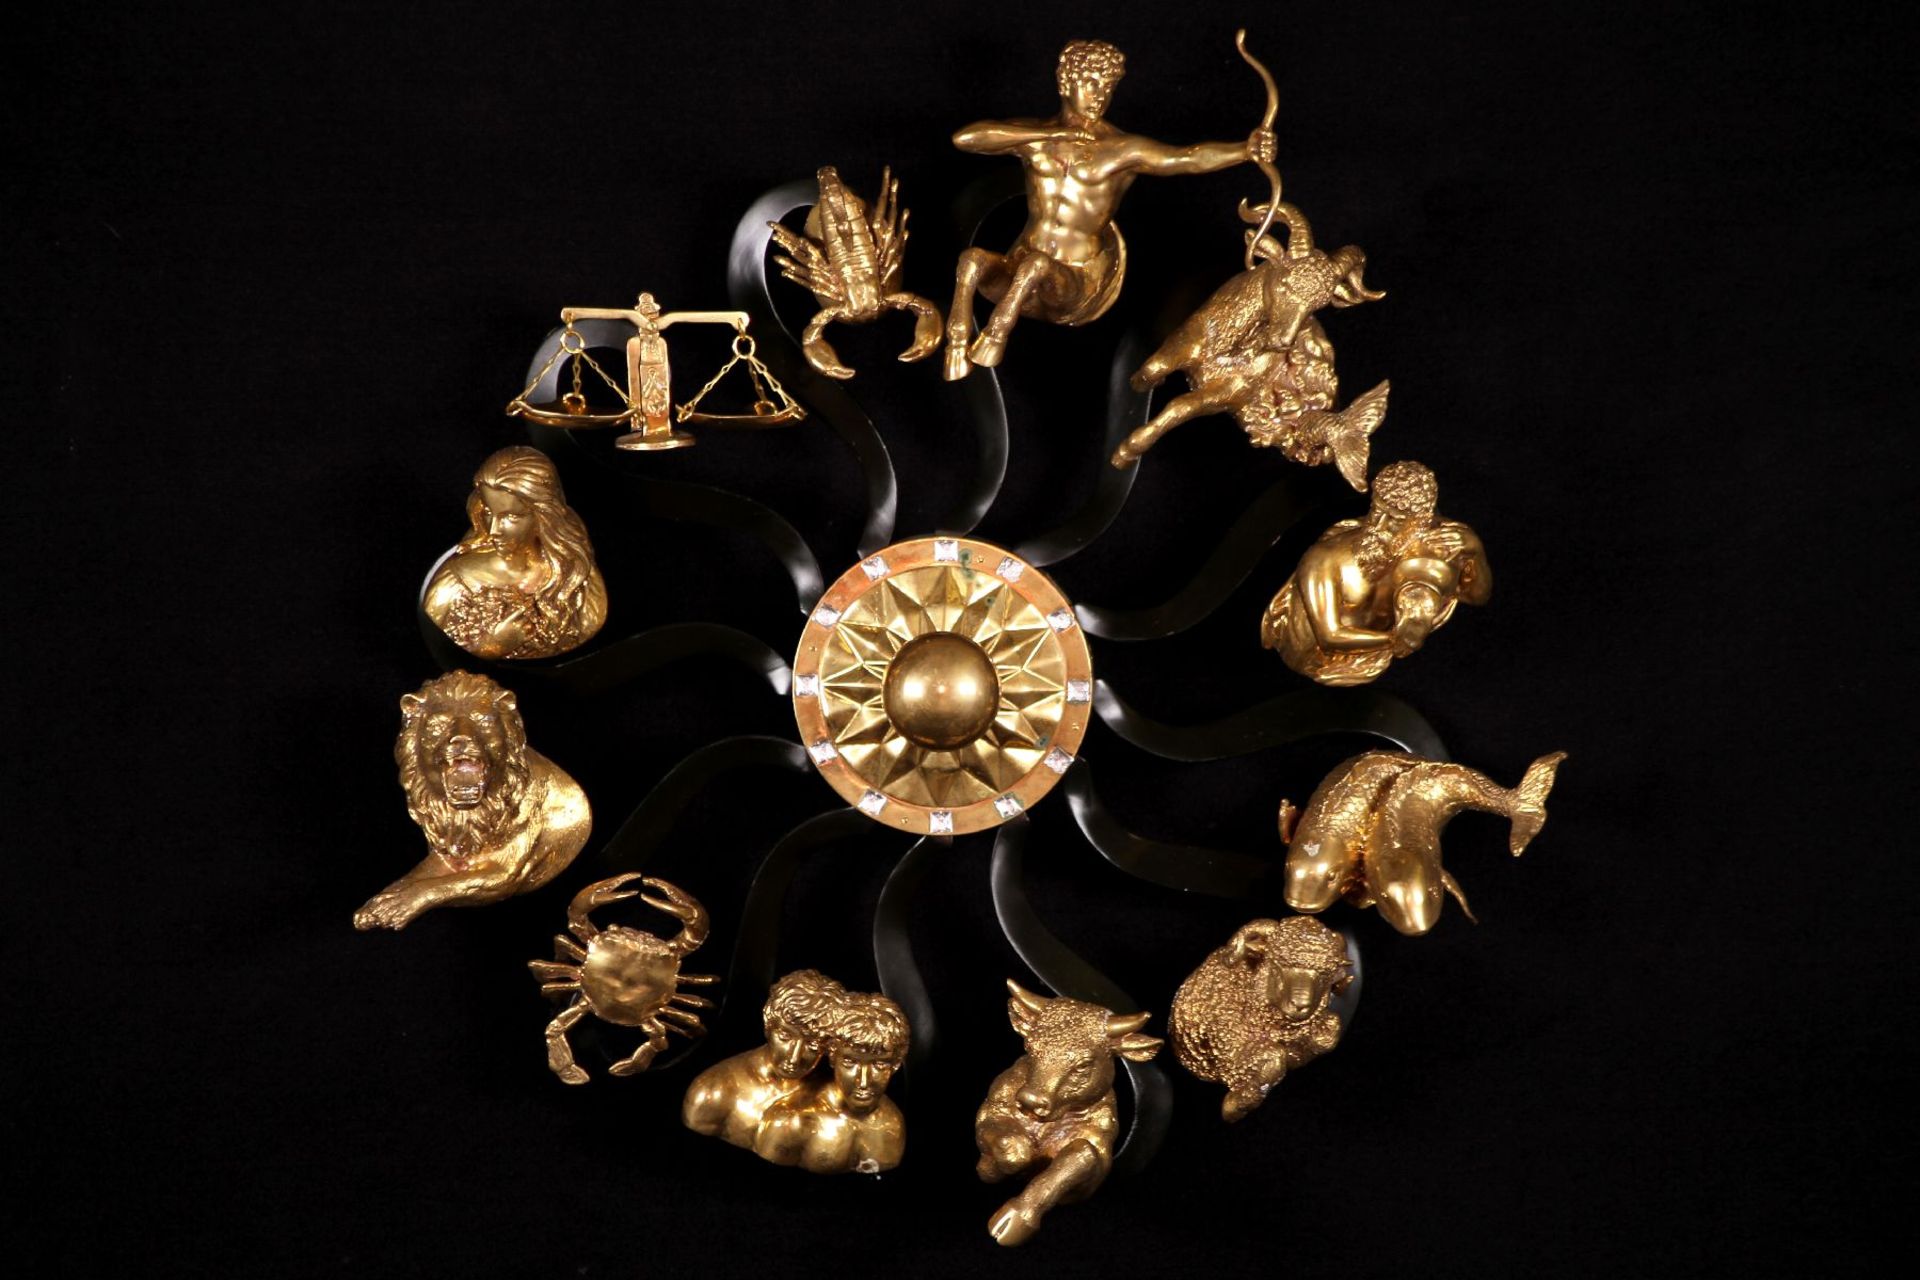 Wallapplike "12 zodiac signs", bronze, zodiac signs placed on rays around a sun placed in the